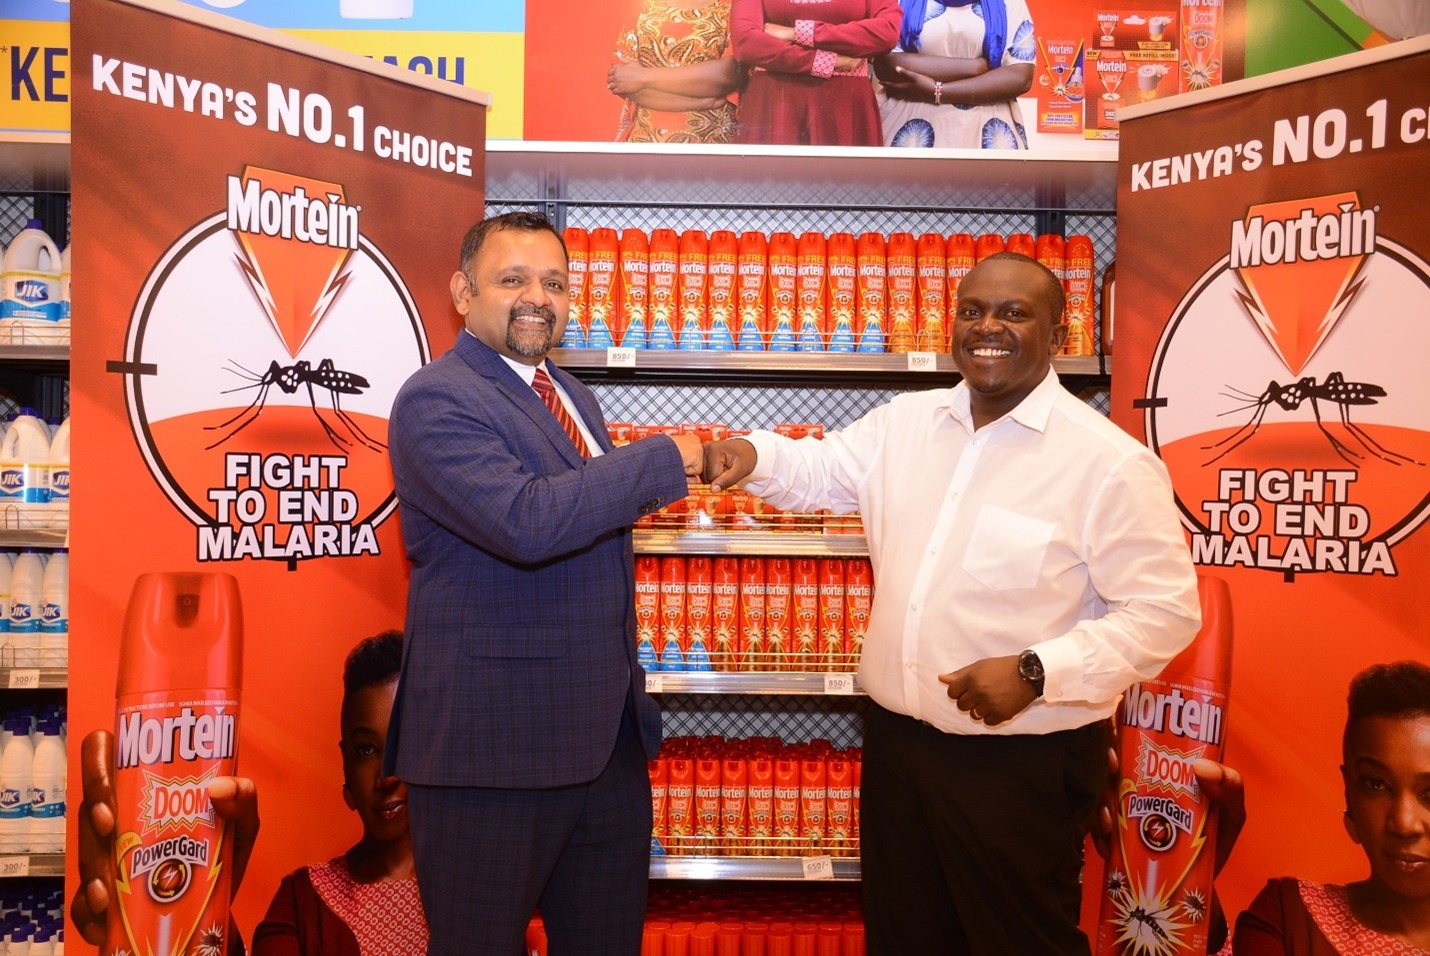 Reckitt East Africa General Manager Asif Hashimi (left) with Naivas Chief Commercial Officer Willy Kimani in Nairobi during the marking of World Malaria Day. Reckitt through its brand Mortein has entered into a strategic collaboration with Naivas to create awareness on Malaria in the country in a bid to enhance prevention methods.